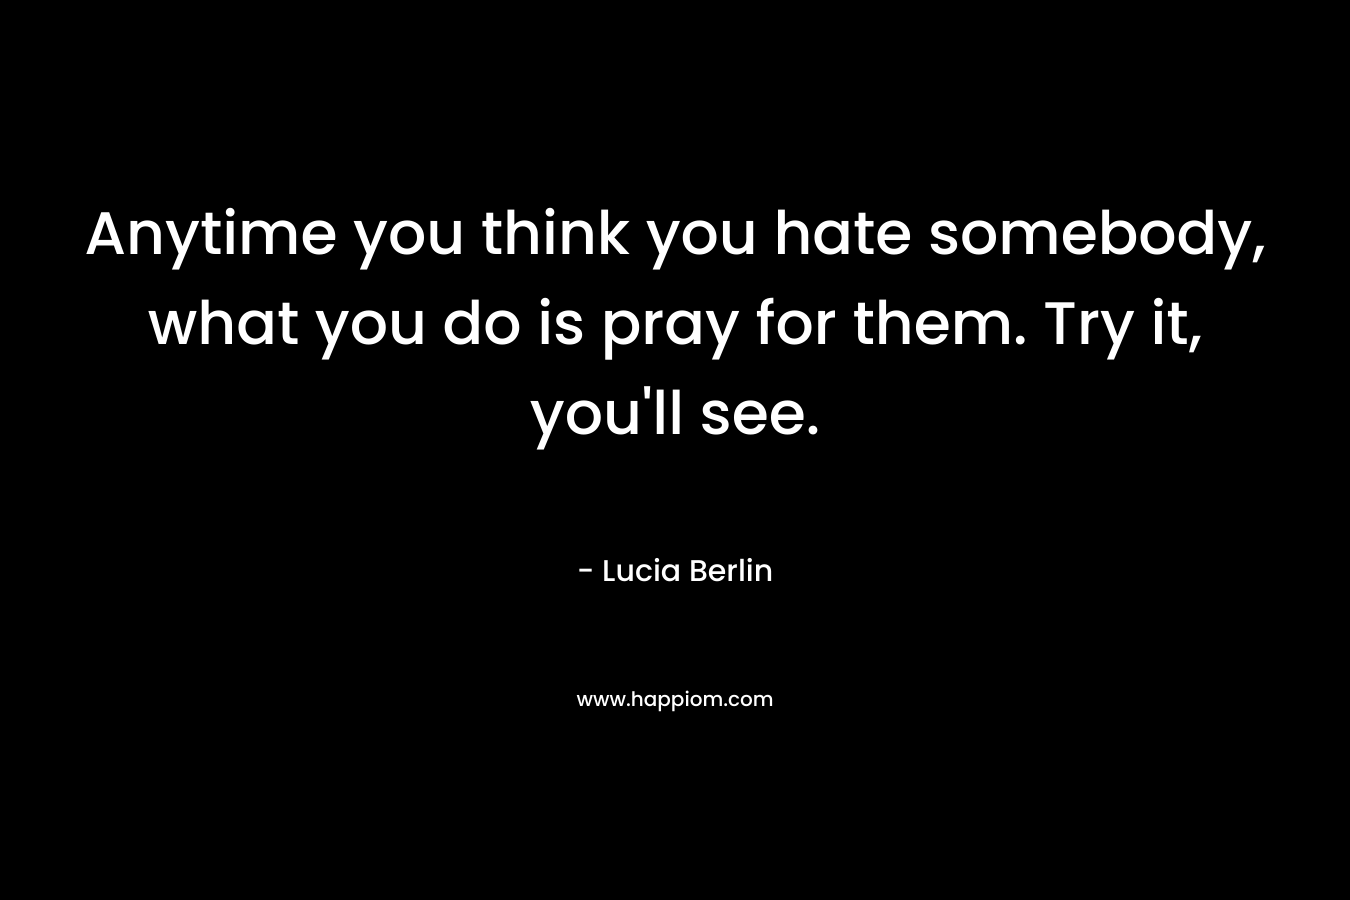 Anytime you think you hate somebody, what you do is pray for them. Try it, you’ll see. – Lucia Berlin